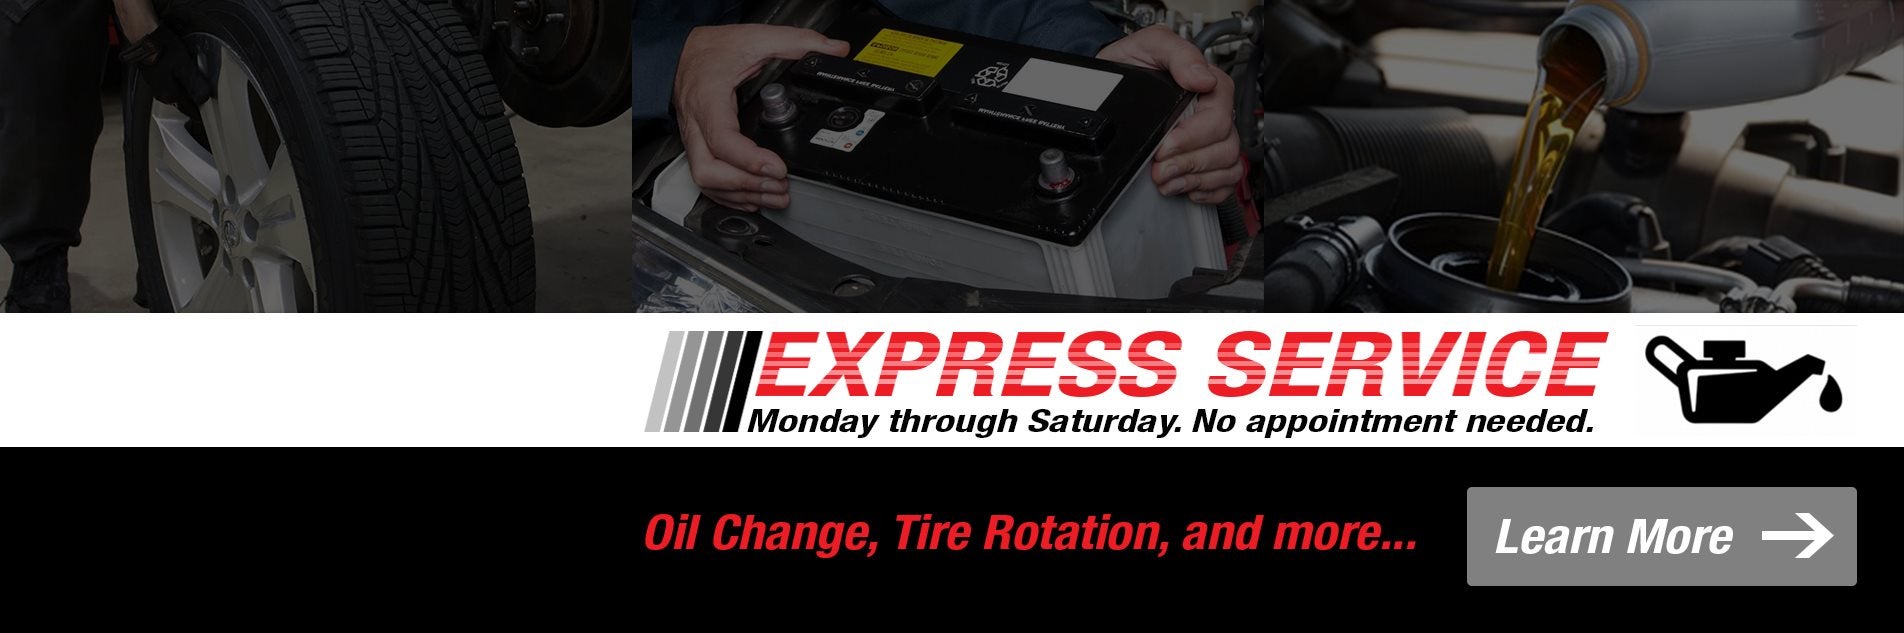 Express Oil Change, Tire Rotation, and more at Thelen!